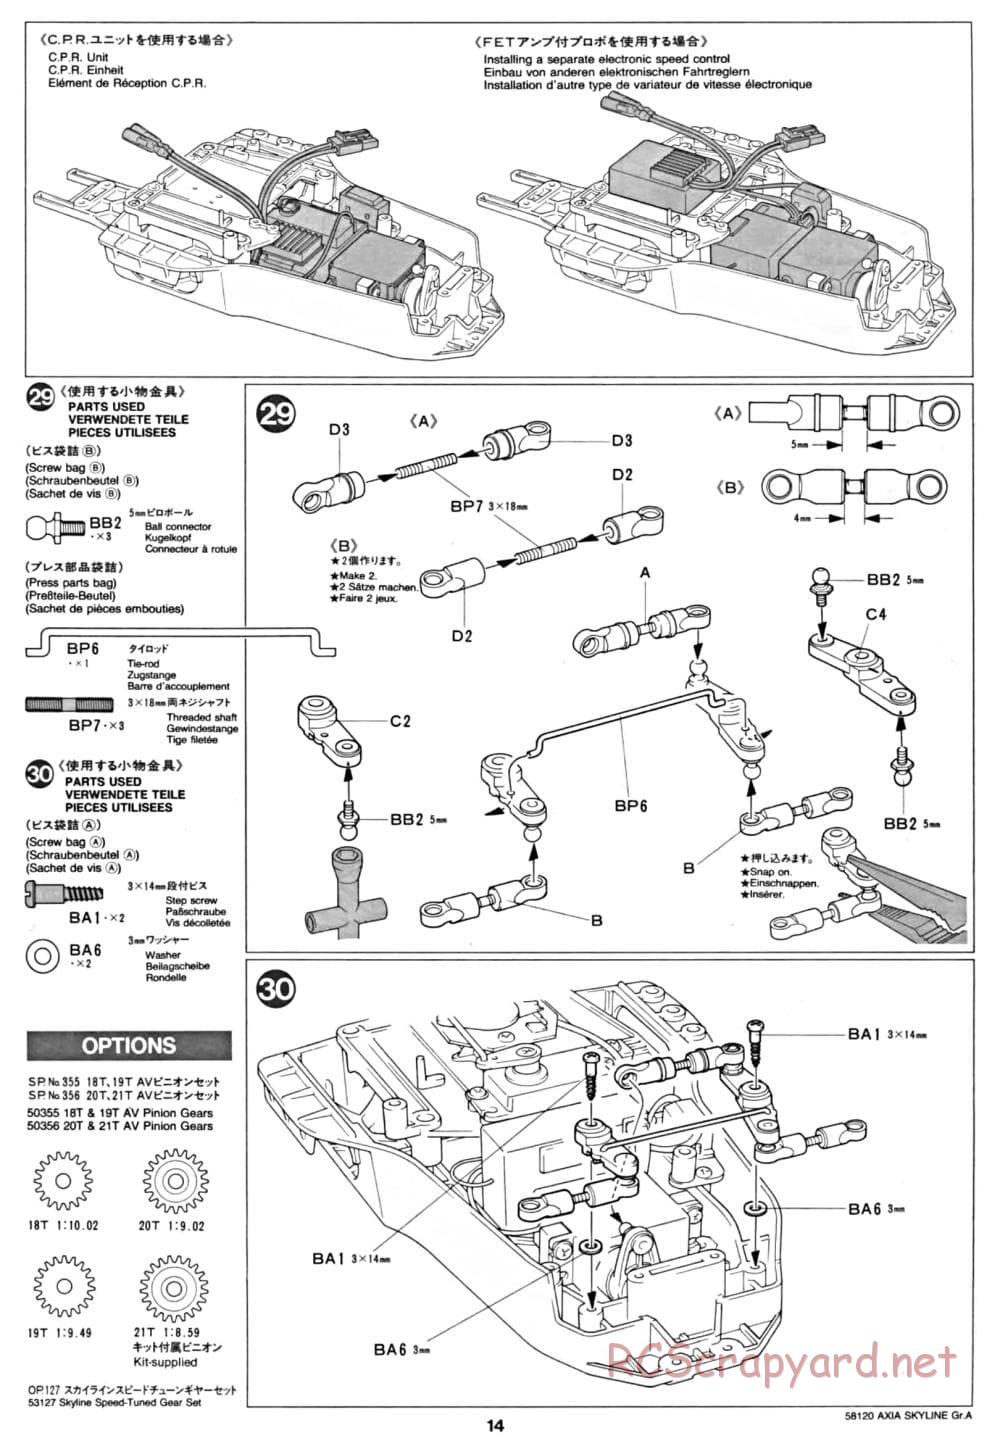 Tamiya - Axia Skyline GT-R Gr.A - TA-01 Chassis - Manual - Page 14